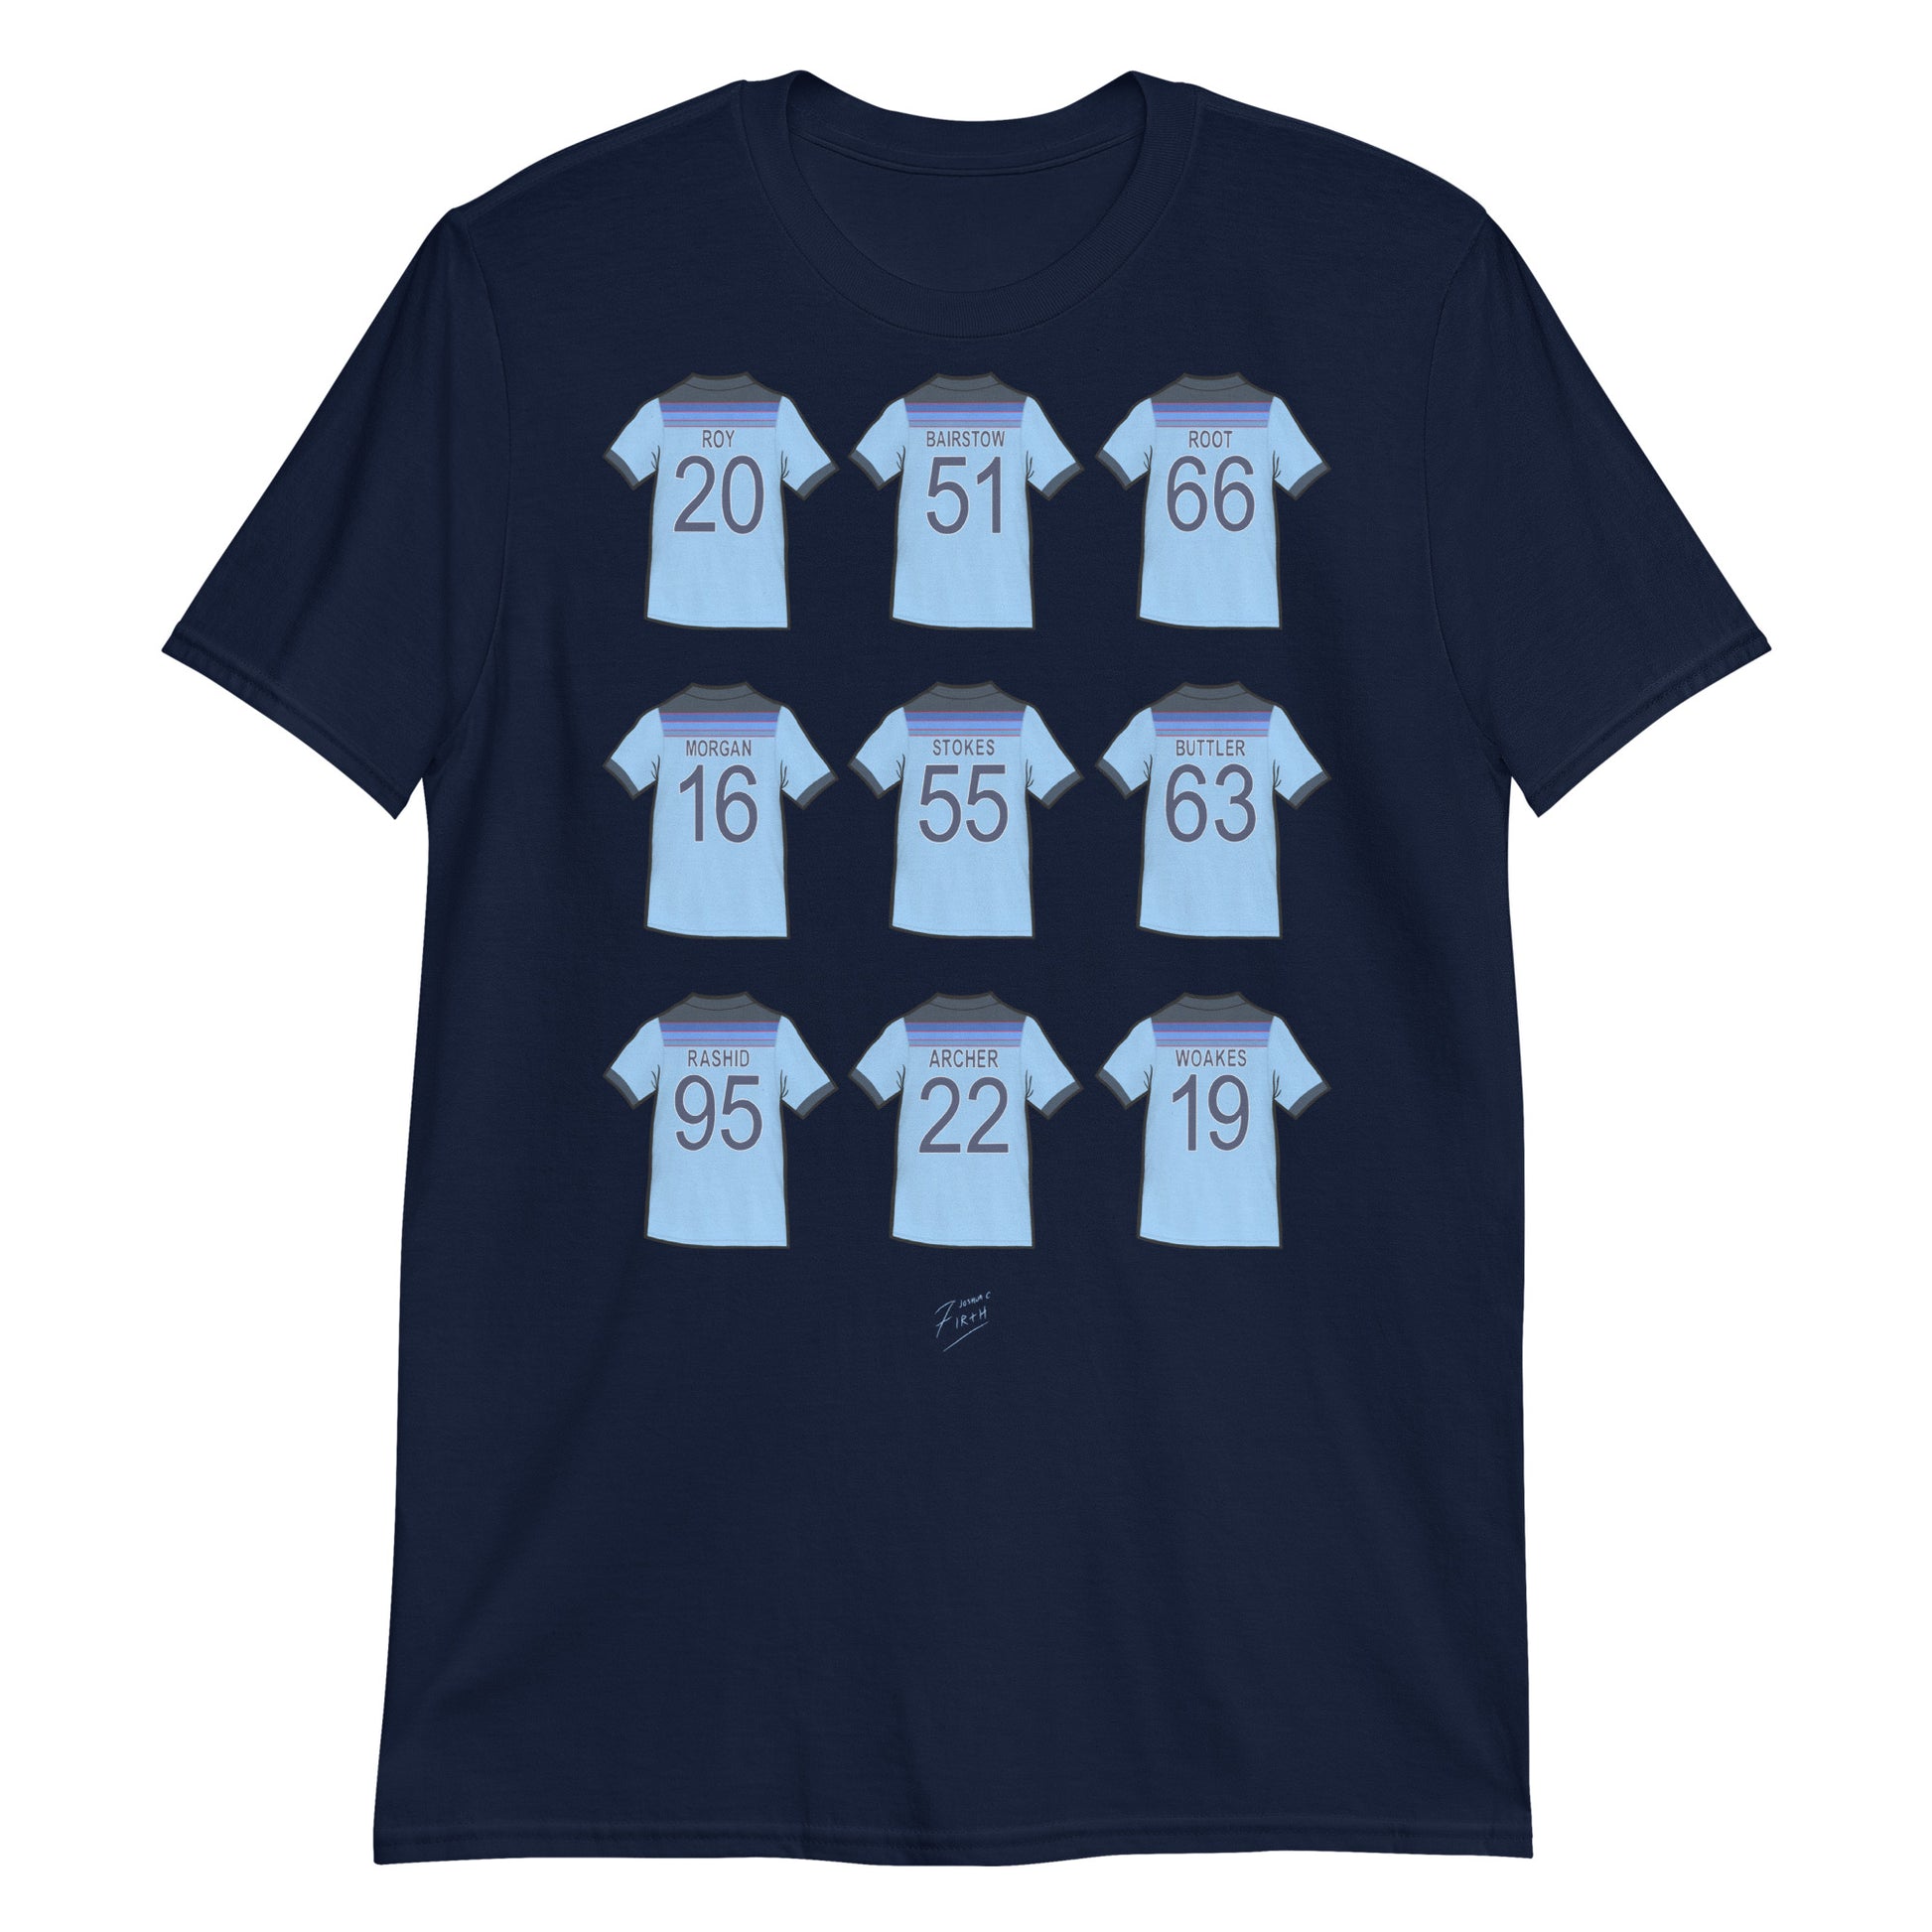 navy Blue England Cricket t-shirt celebrating the World Cup in 2019